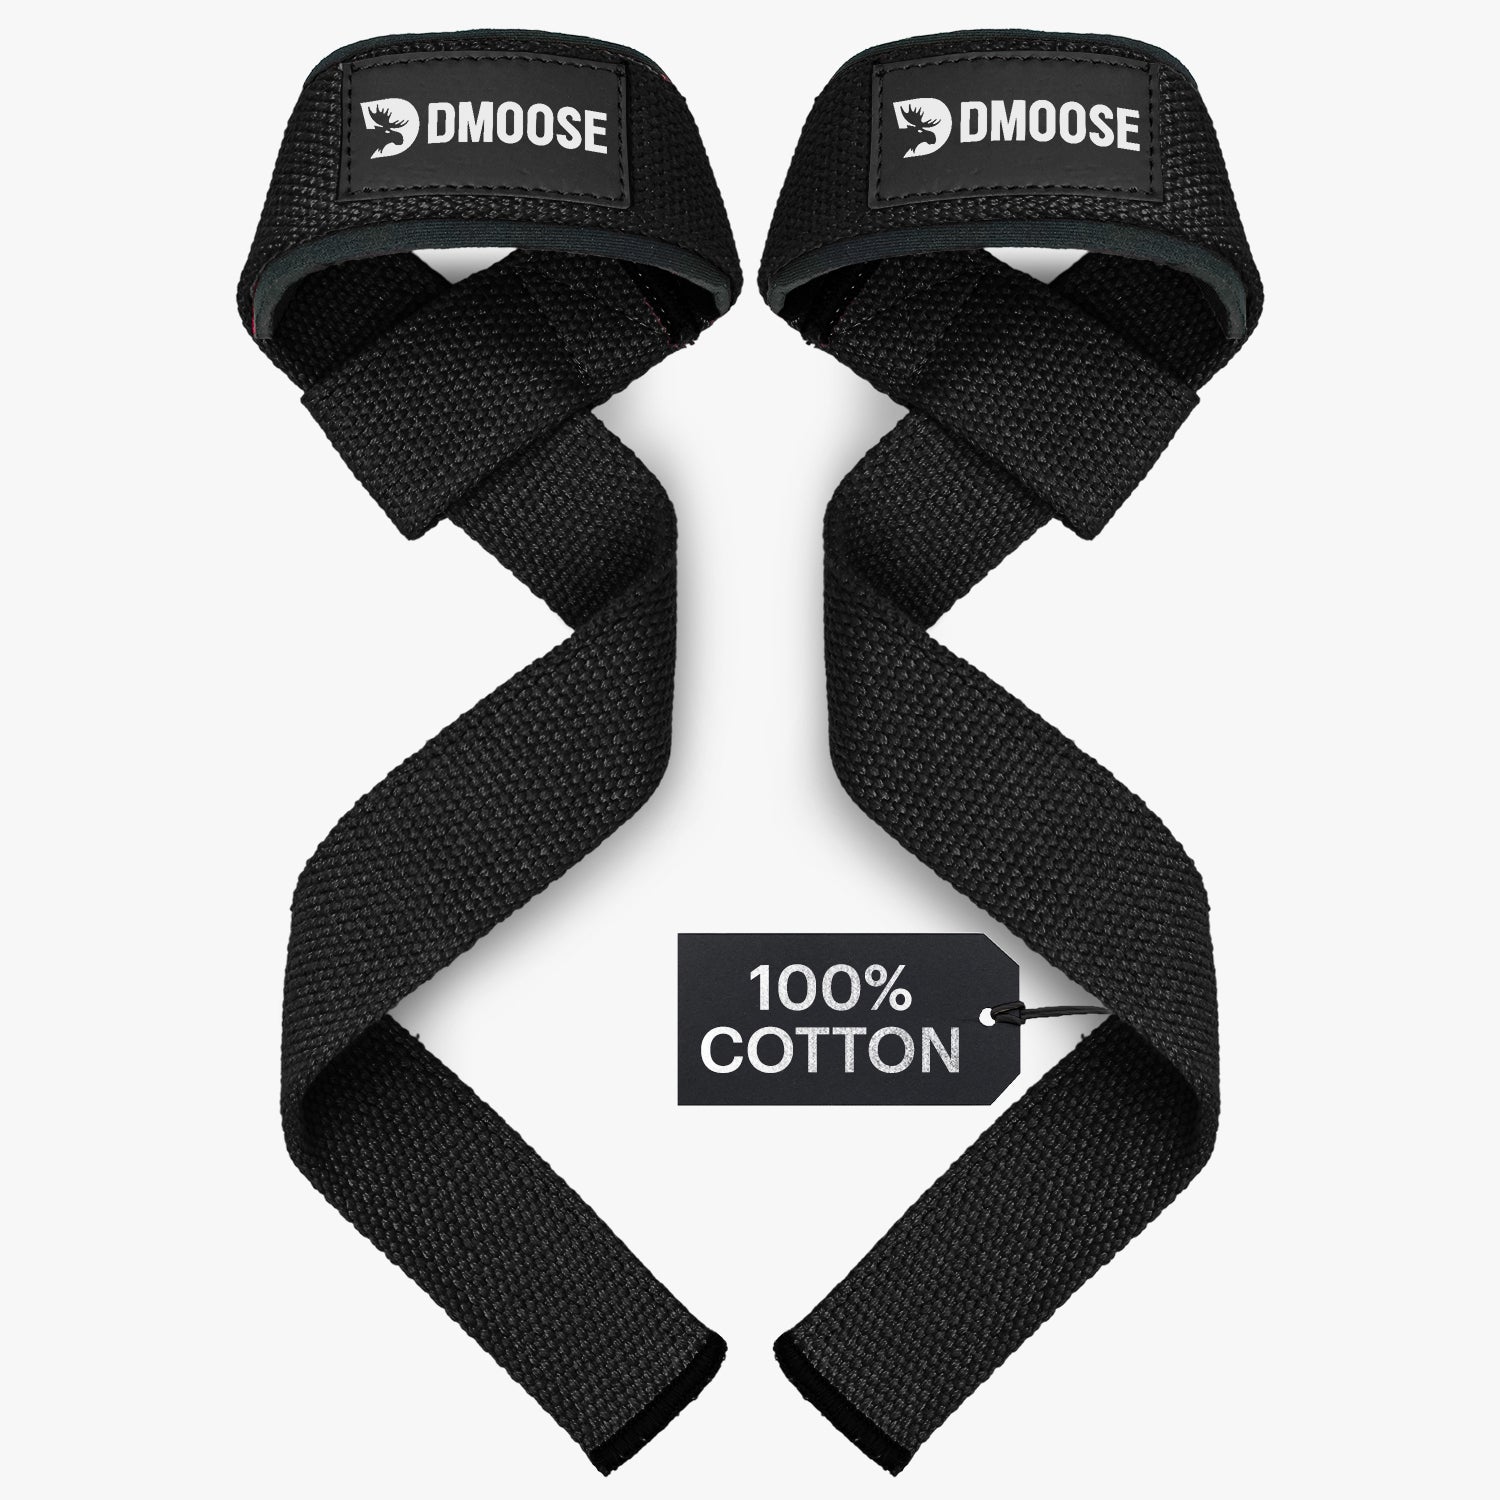 What Are Wrist Straps, How to Put Them On & Use Them Correctly? – DMoose